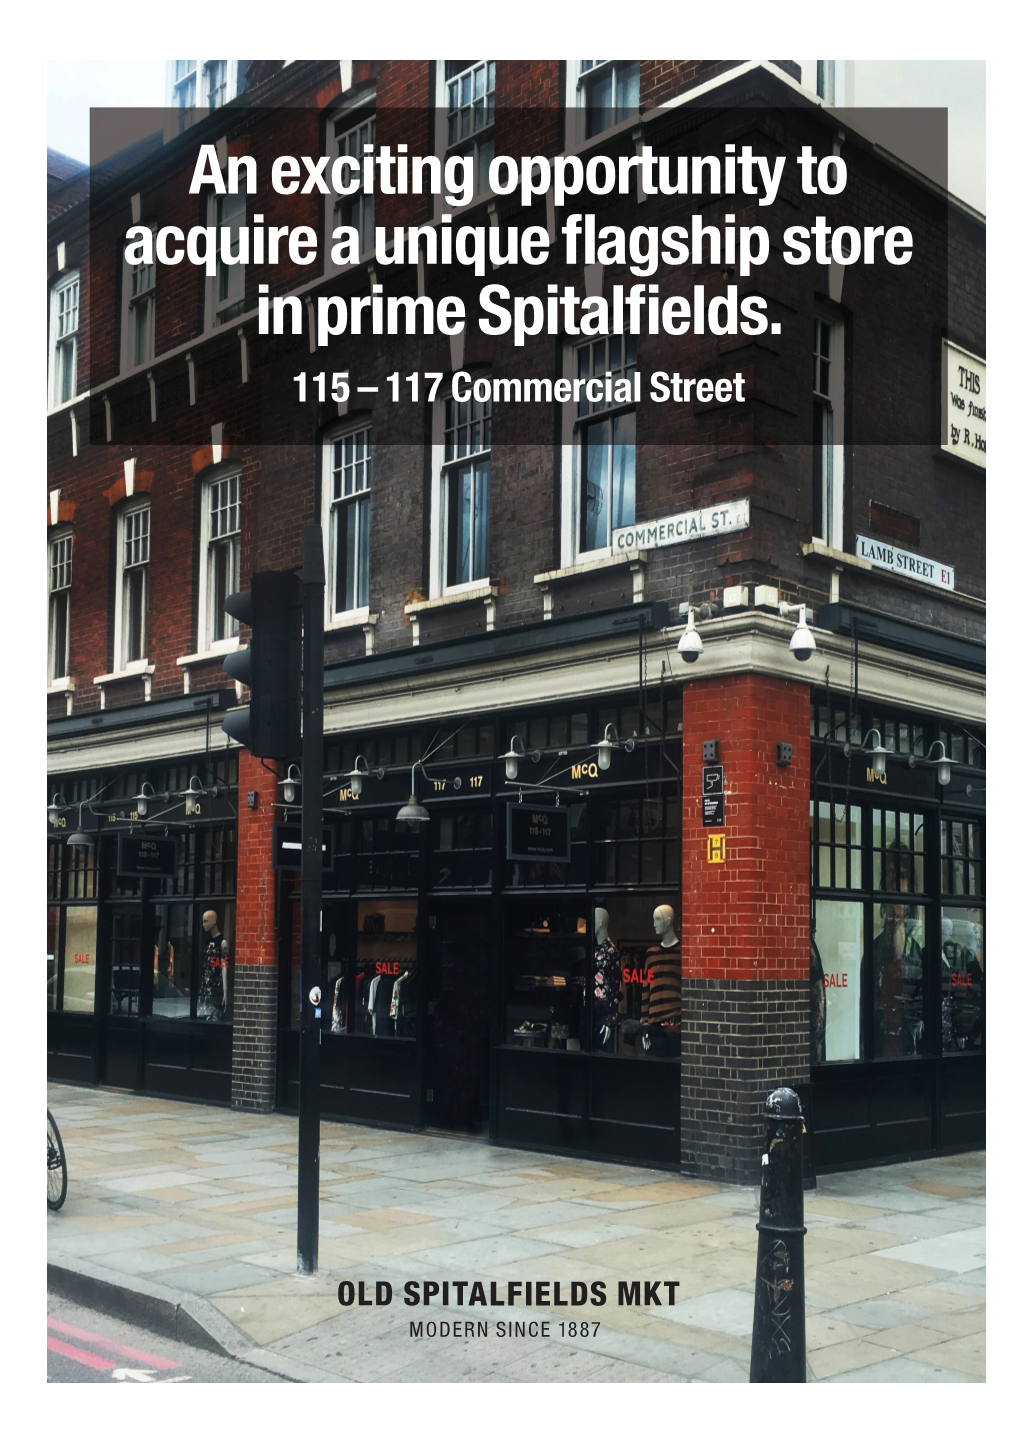 An Exciting Opportunity to Acquire a Unique Flagship Store in Prime Spitalfields